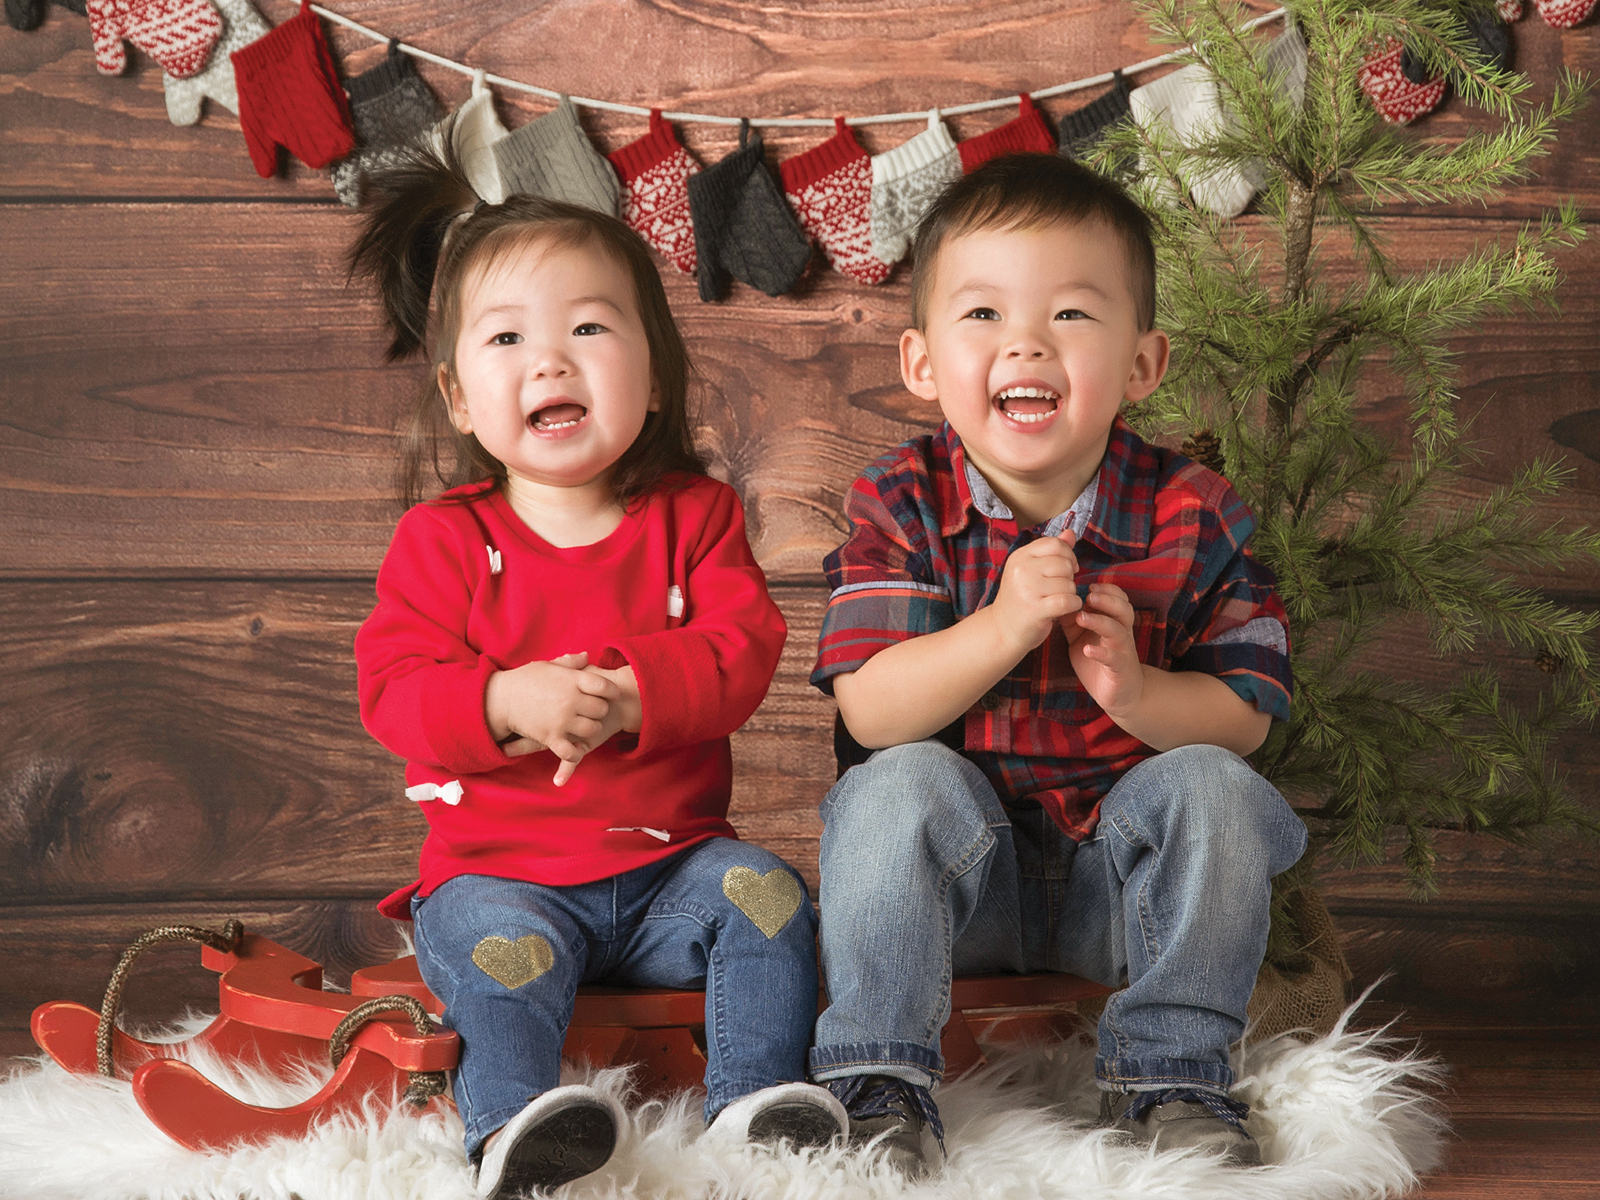 Preschool Photography Idea from Lifetouch